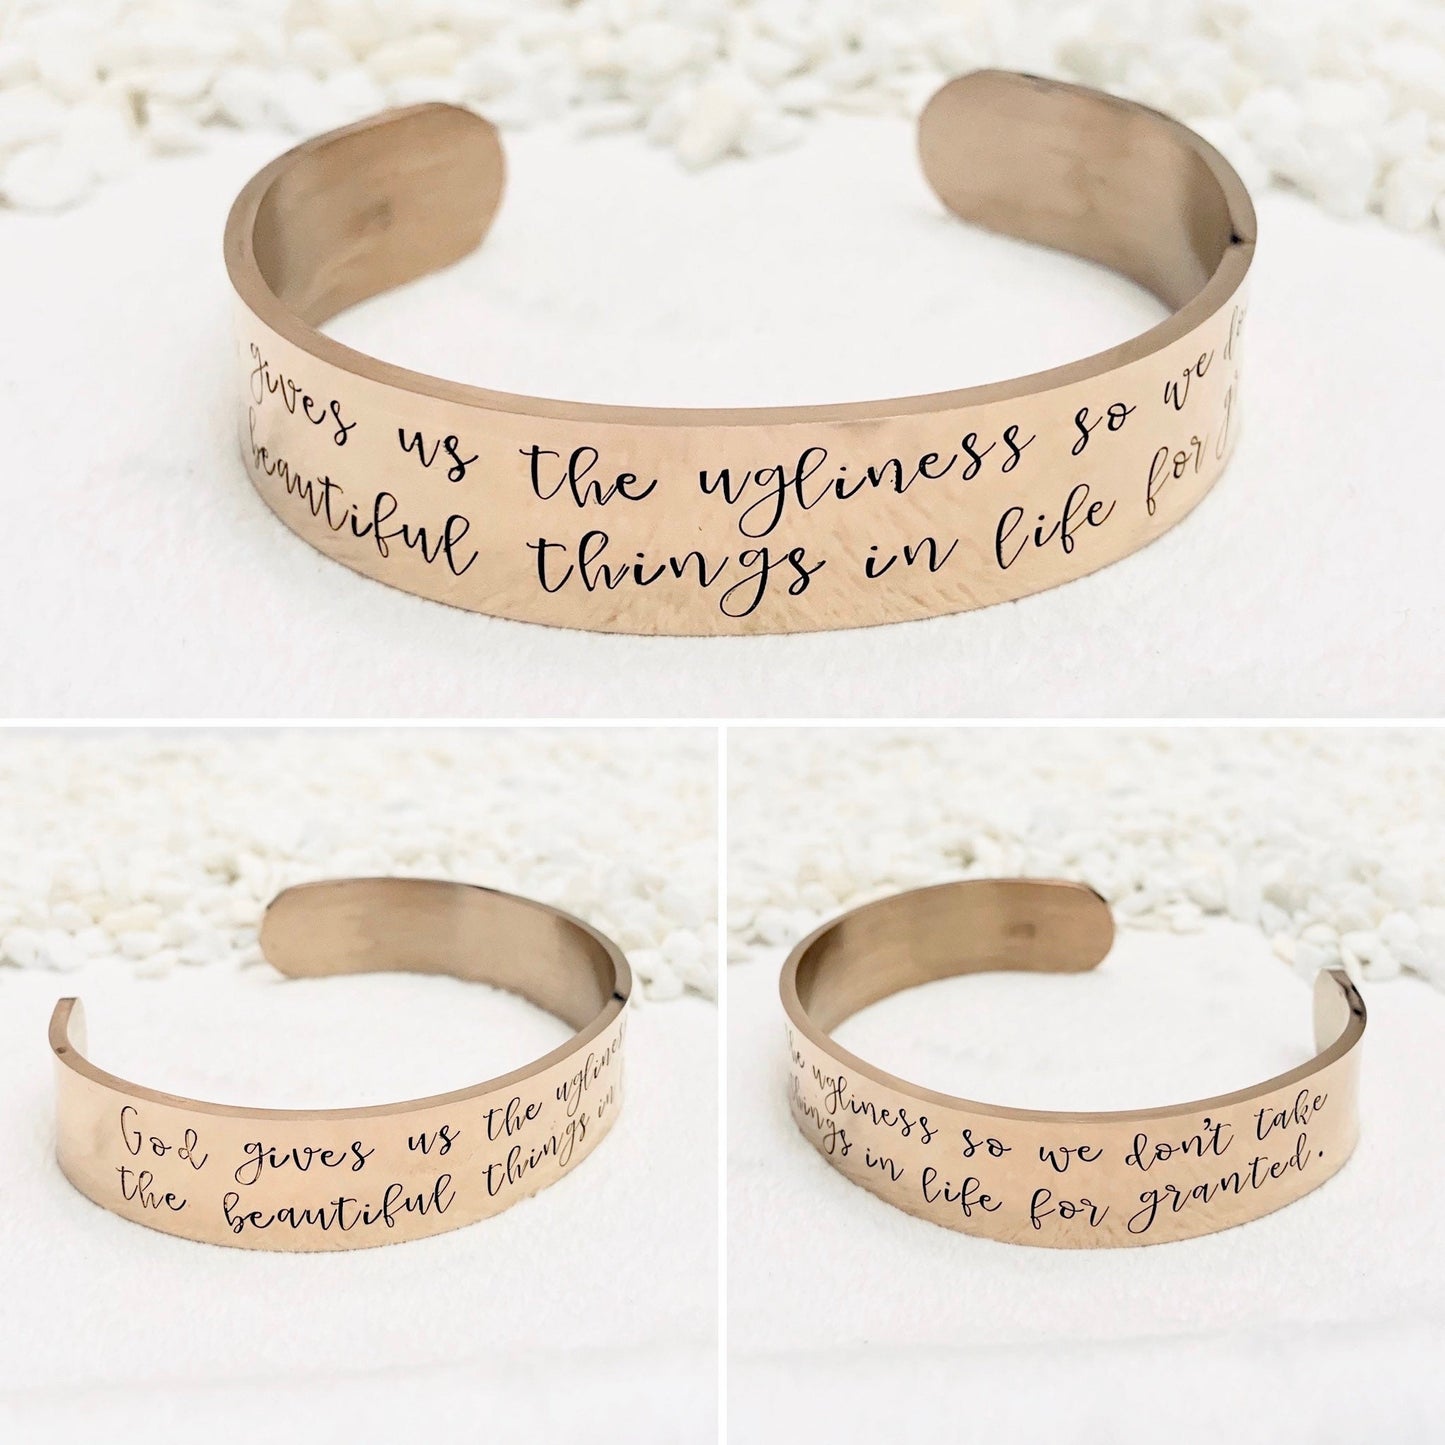 God gives us the ugliness so we don't take the beautiful things in life for granted (Colleen Hoover) - Cuff Bracelet